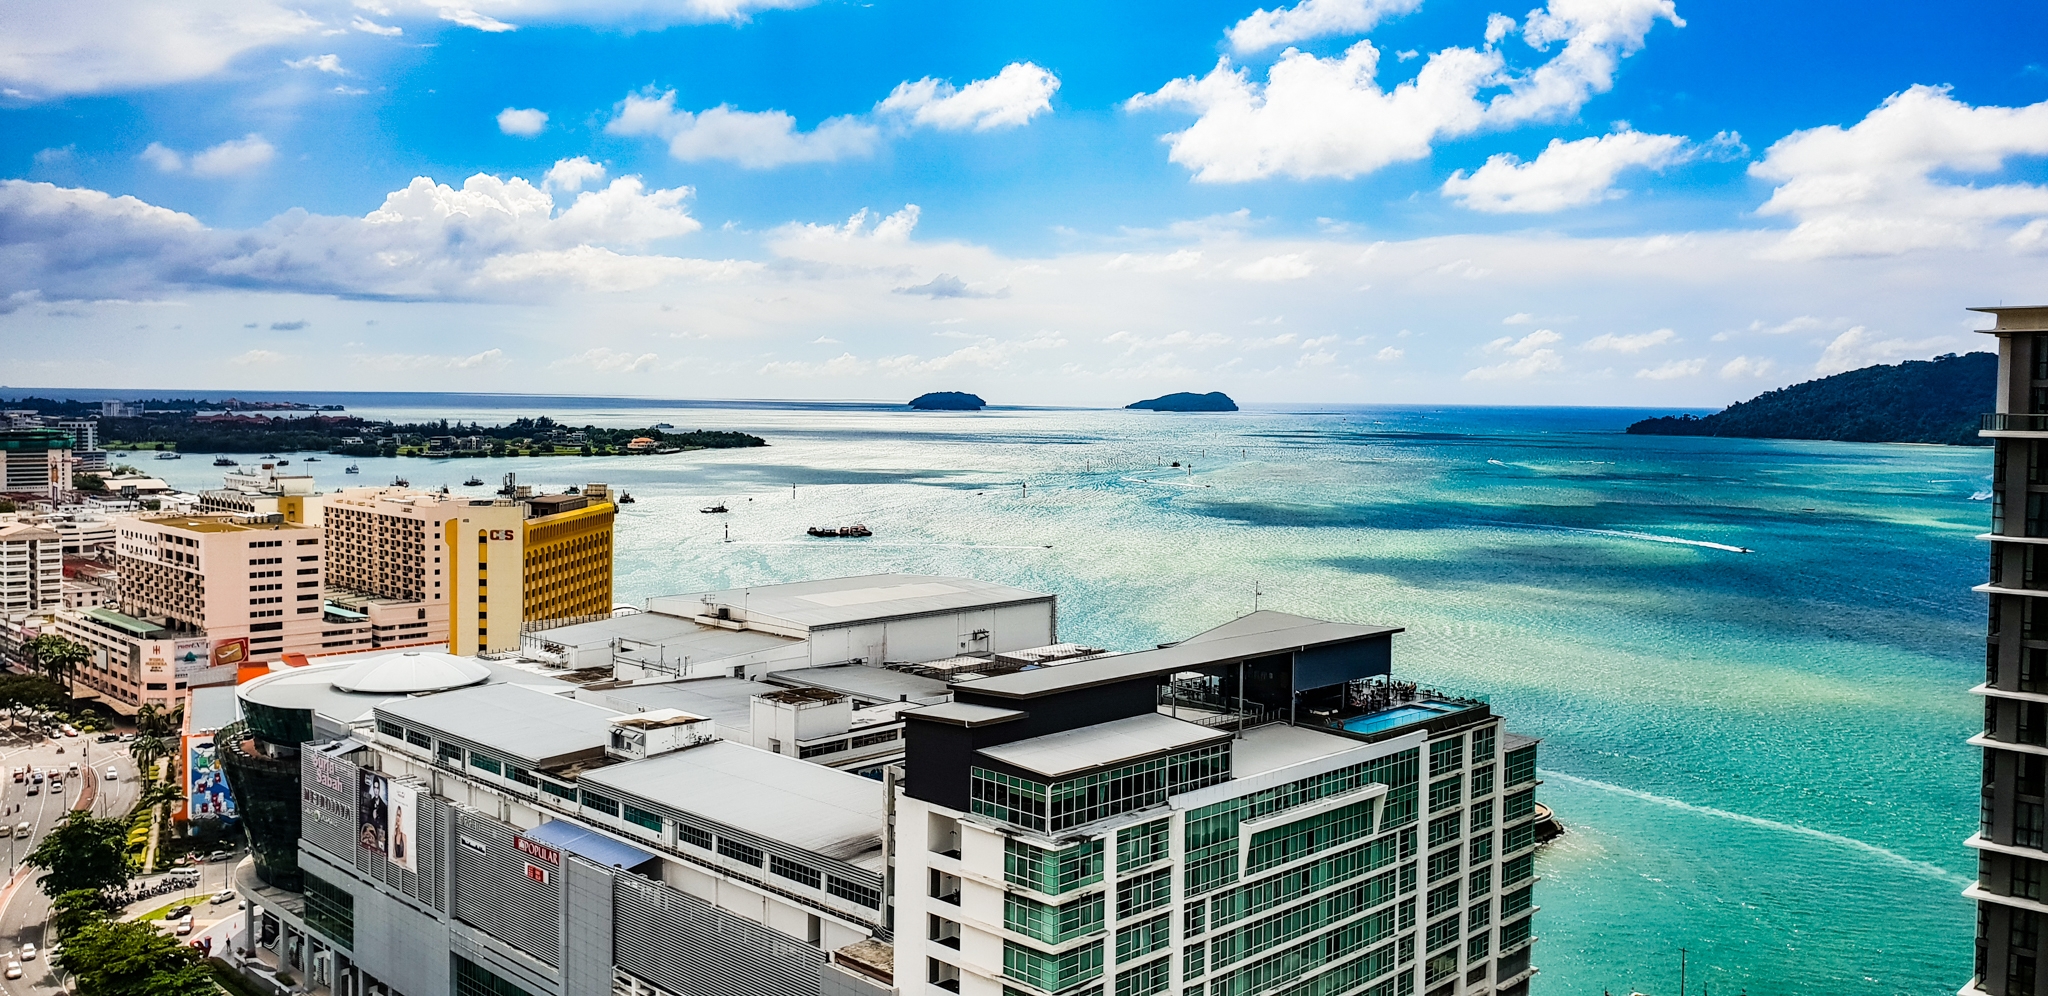 Read more about the article Things to do and see in Kota Kinabalu, Sabah